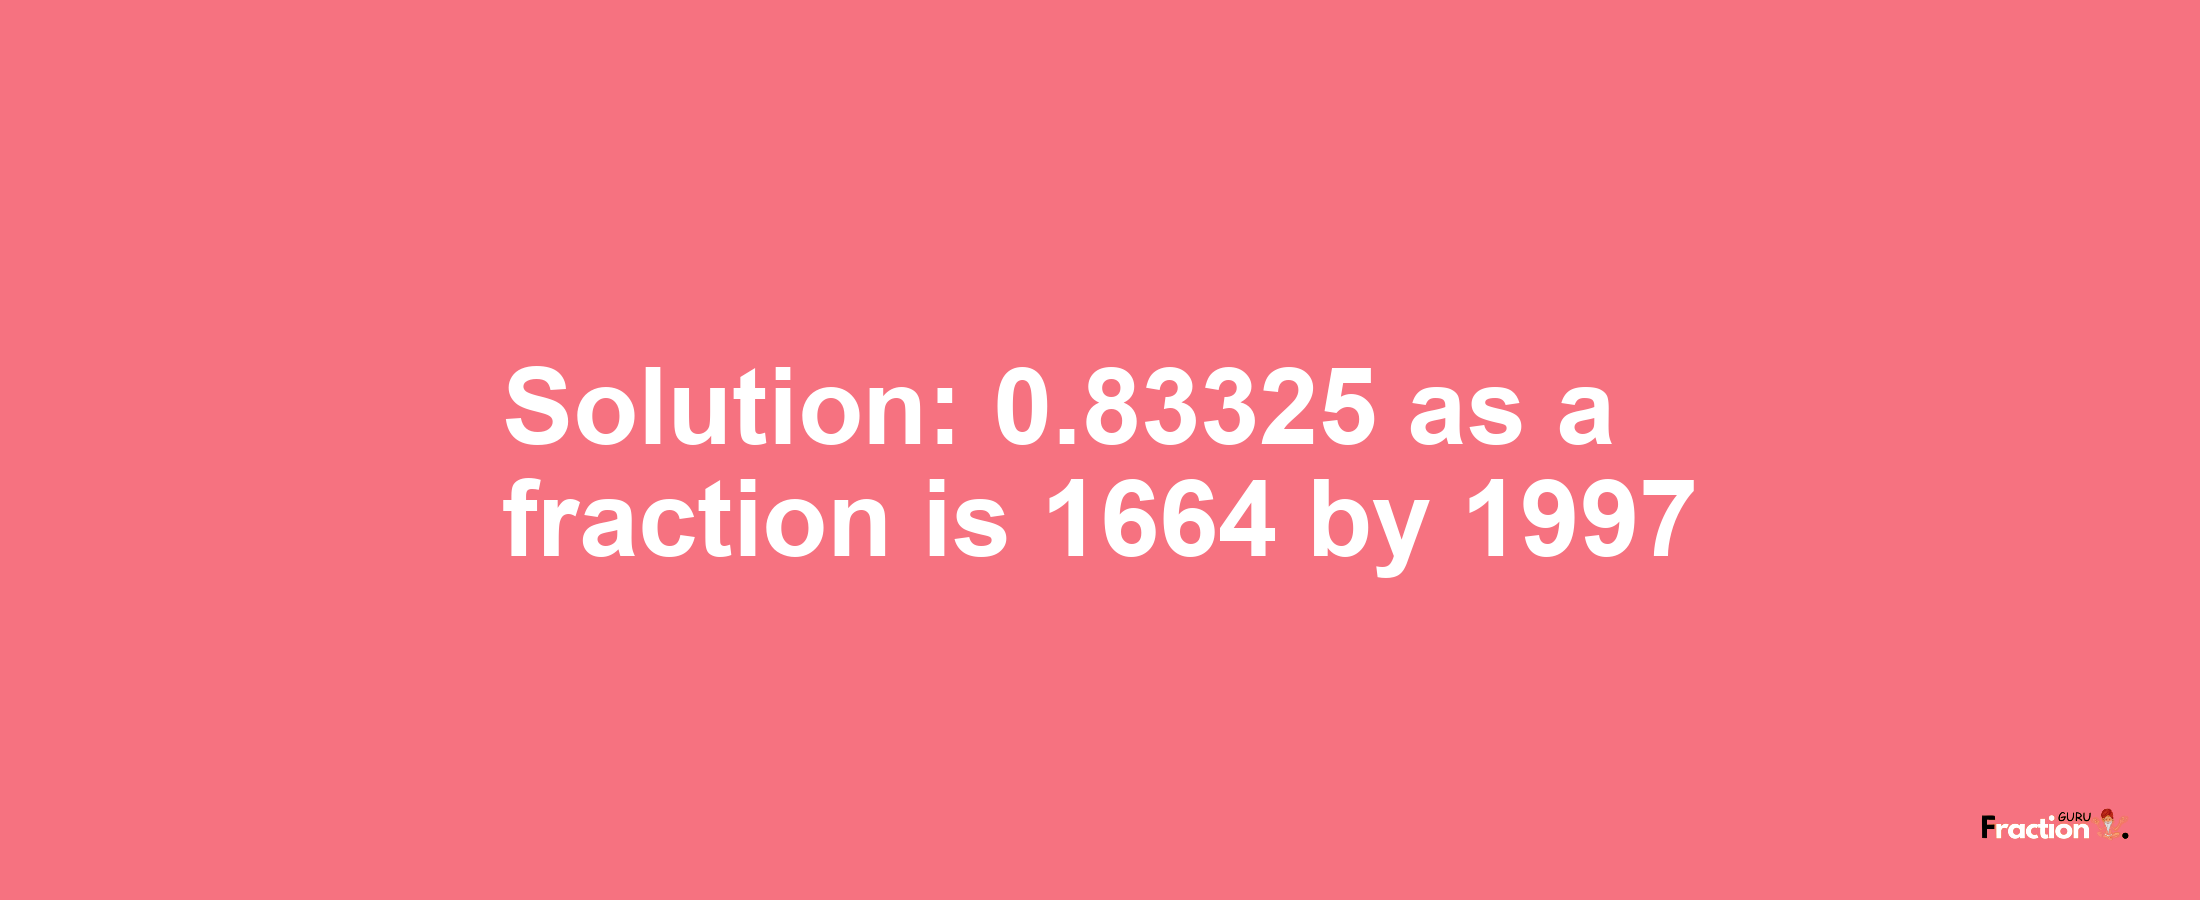 Solution:0.83325 as a fraction is 1664/1997